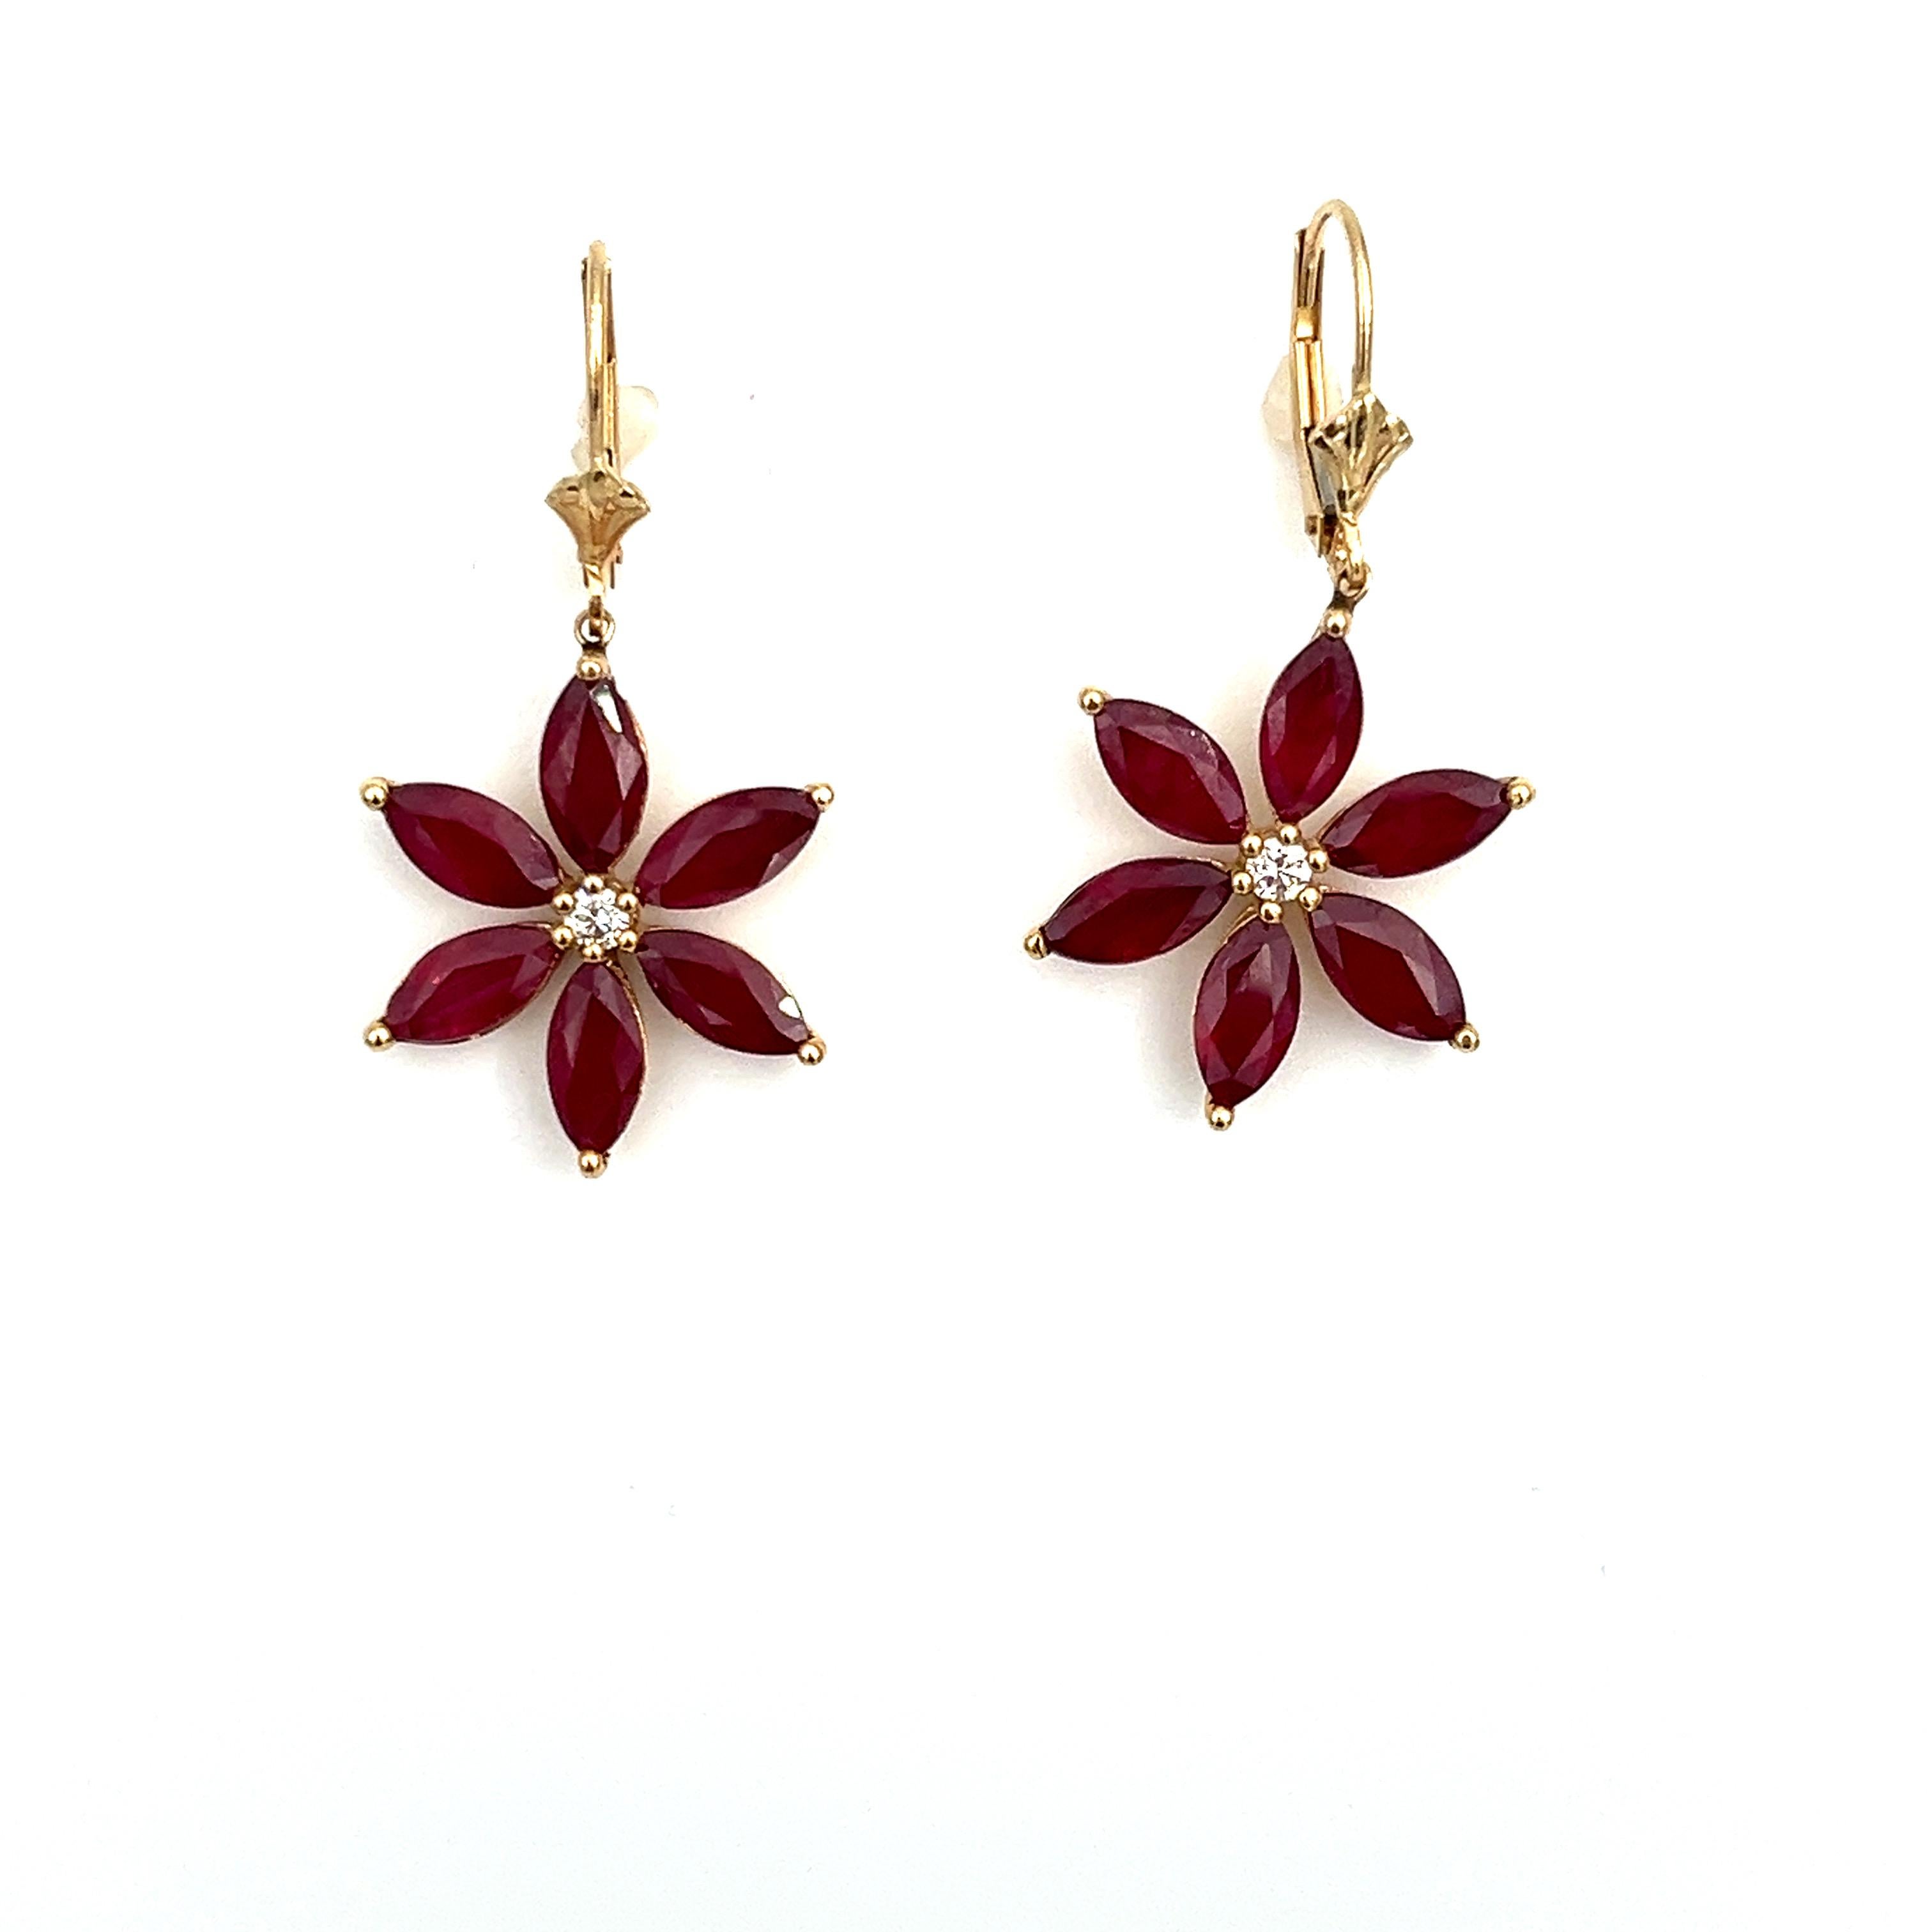 Marquise Cut 5.81 ct Natural Ruby & Diamond Flower Shaped Earrings For Sale